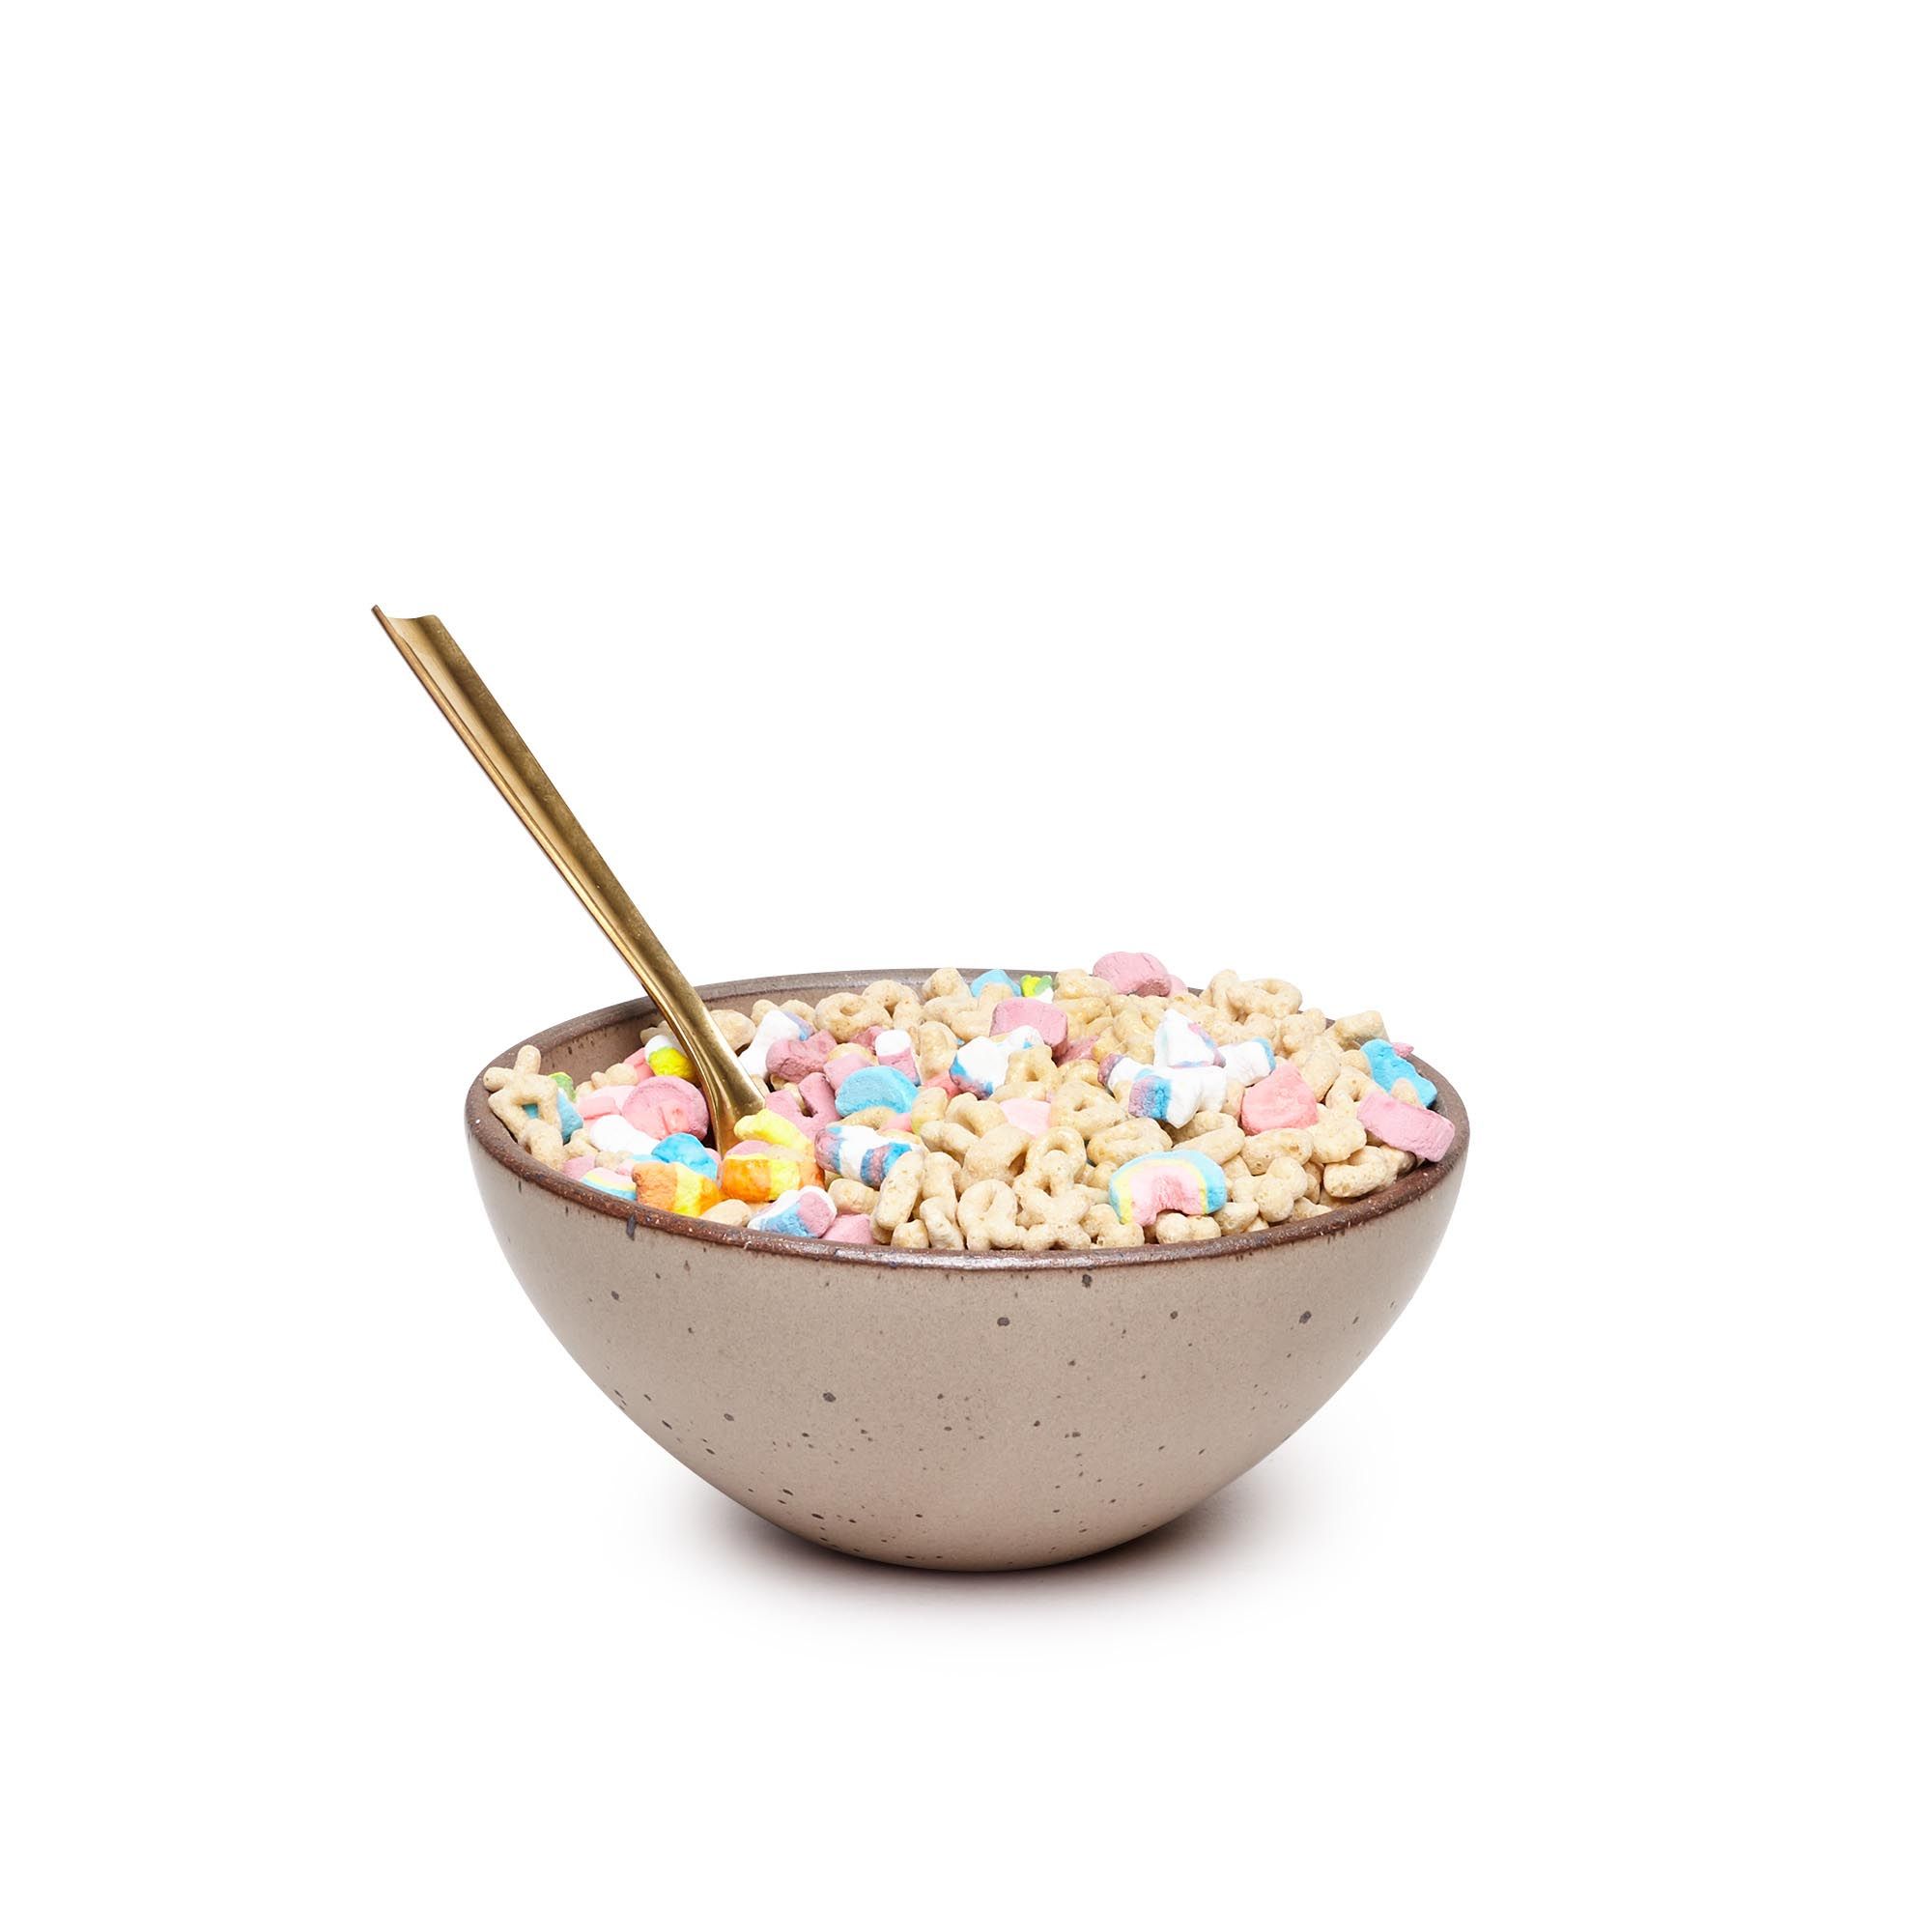 A medium rounded ceramic bowl in a warm pale brown color featuring iron speckles and an unglazed rim, filled with cereal and brass spoon